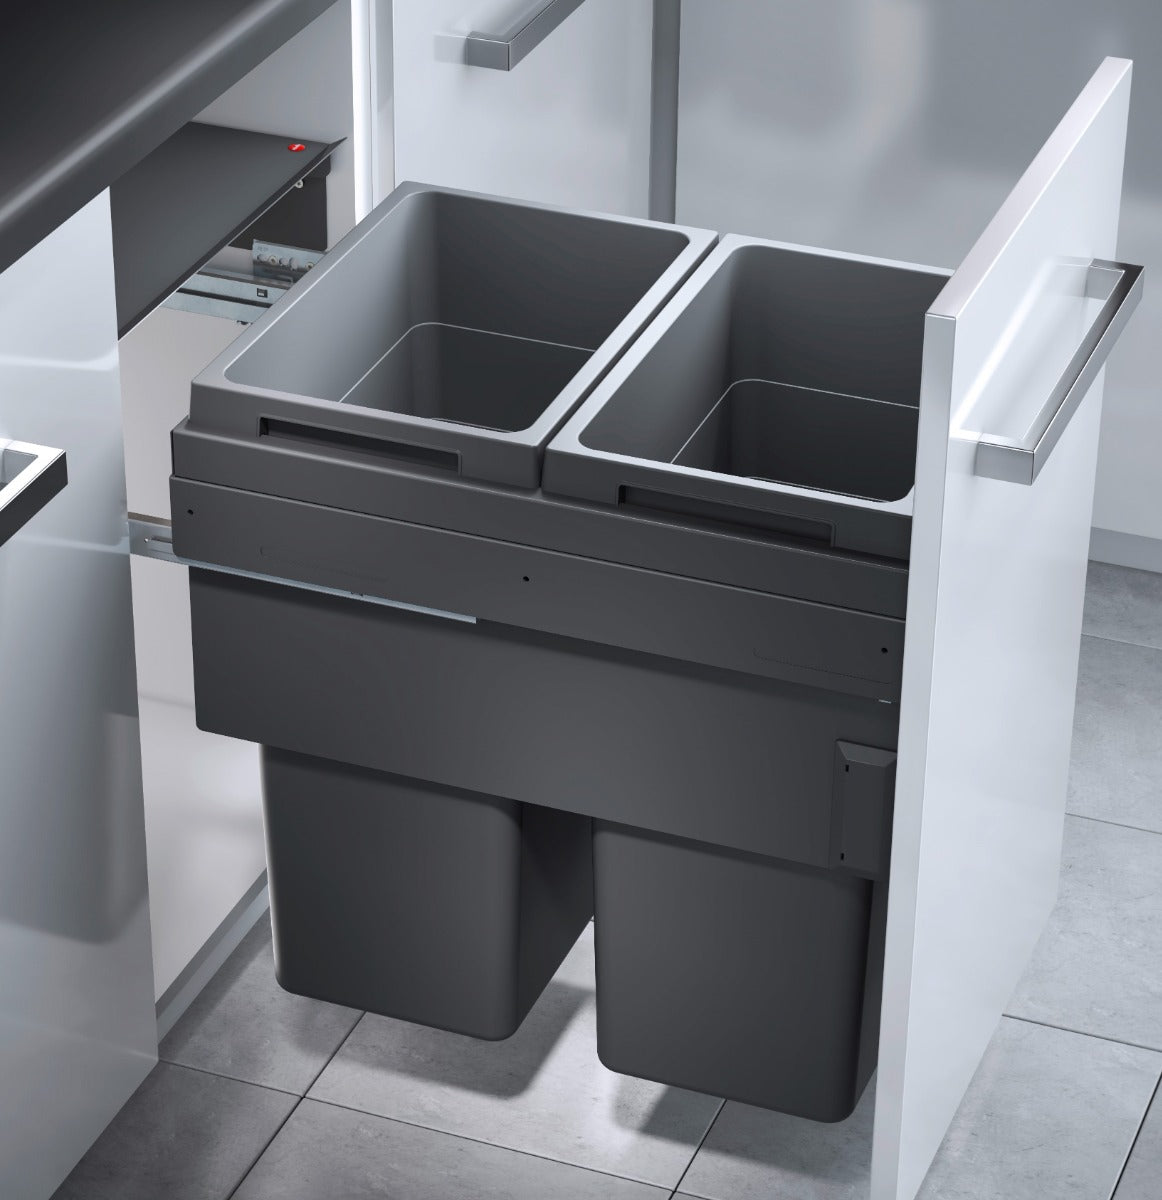 Hailo Euro Cargo 2 compartment 76 Litre in-cupboard kitchen recycling bin in dark grey for 450mm wide cabinet 503.HL70.332